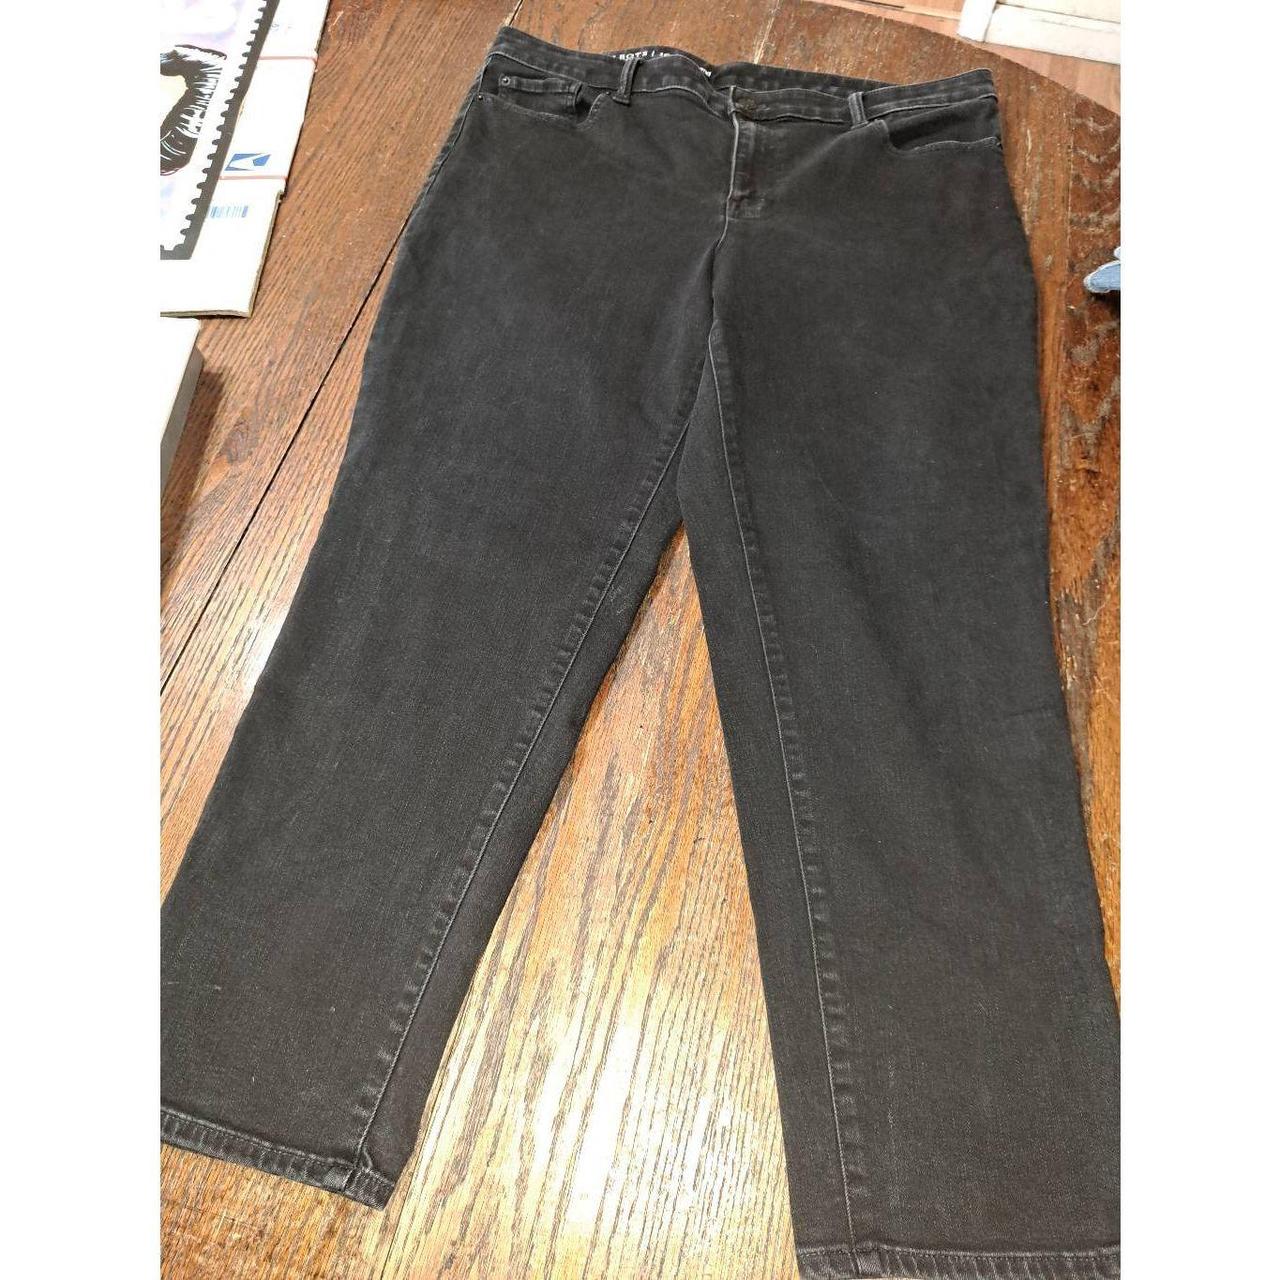 Good Used Condition Women's Size 16 Talbots Flawless - Depop